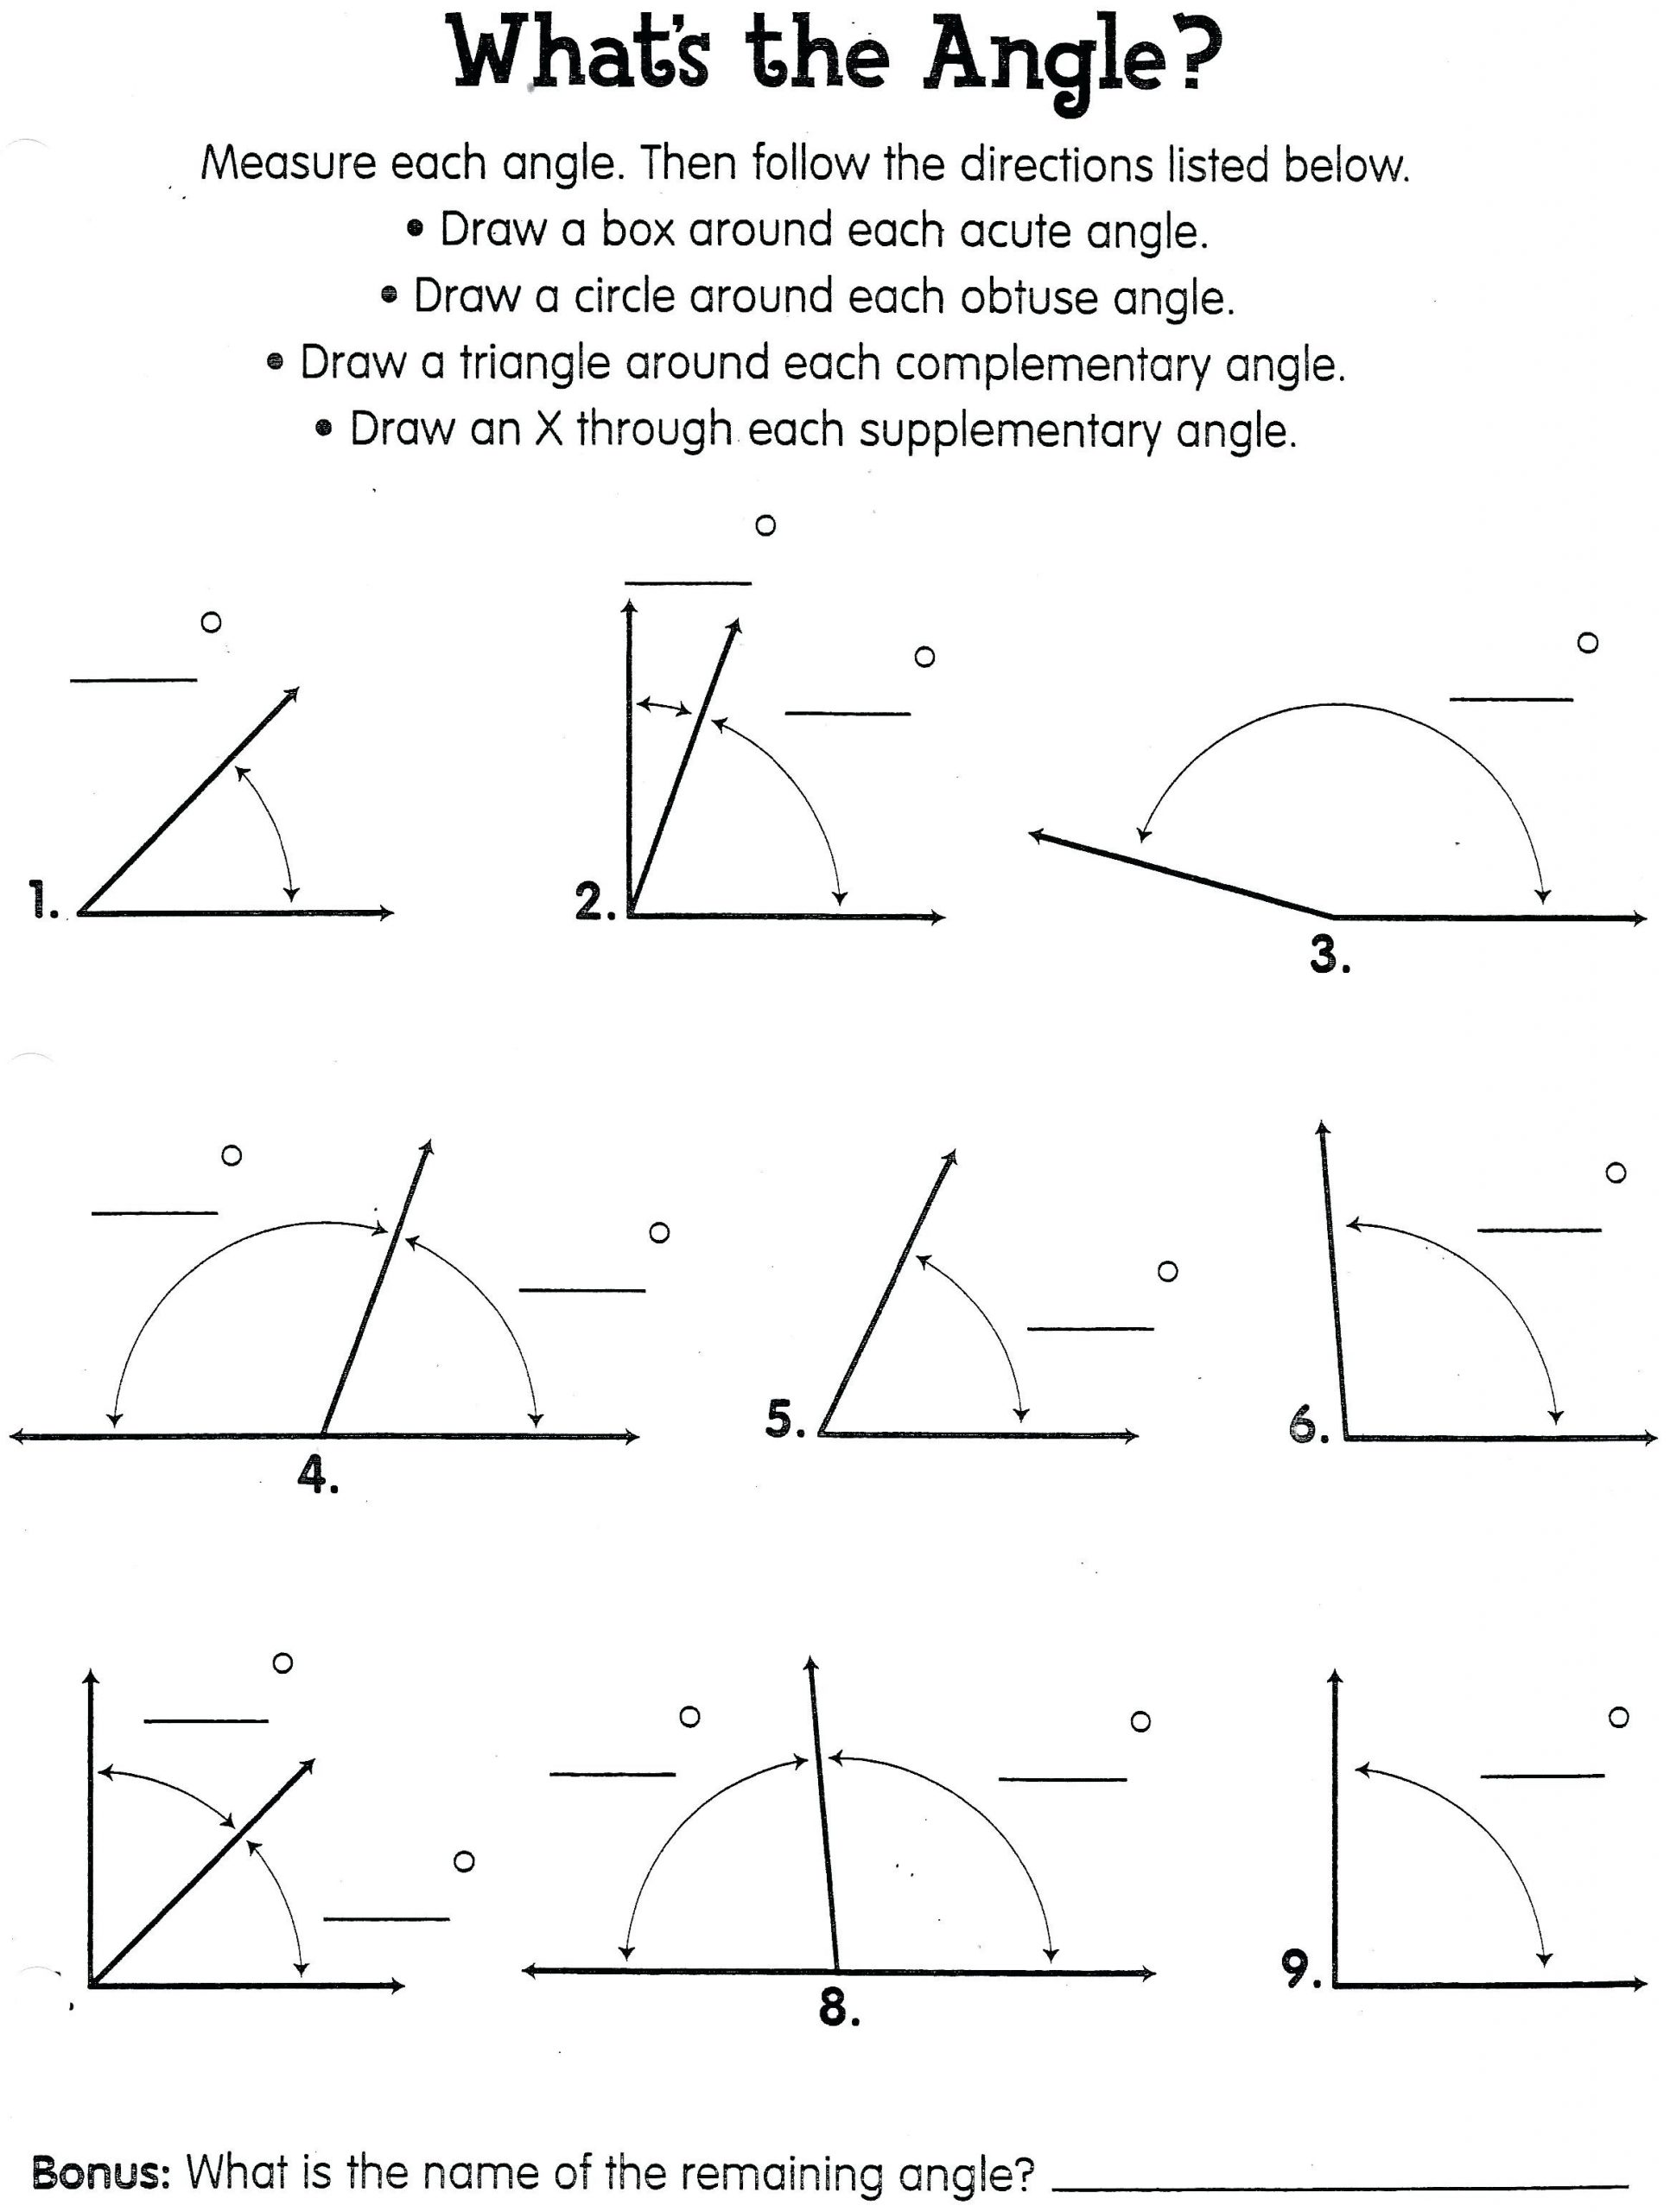 Finding Missing Angles Worksheet Angle Measurement Worksheet Angle Worksheets Angle